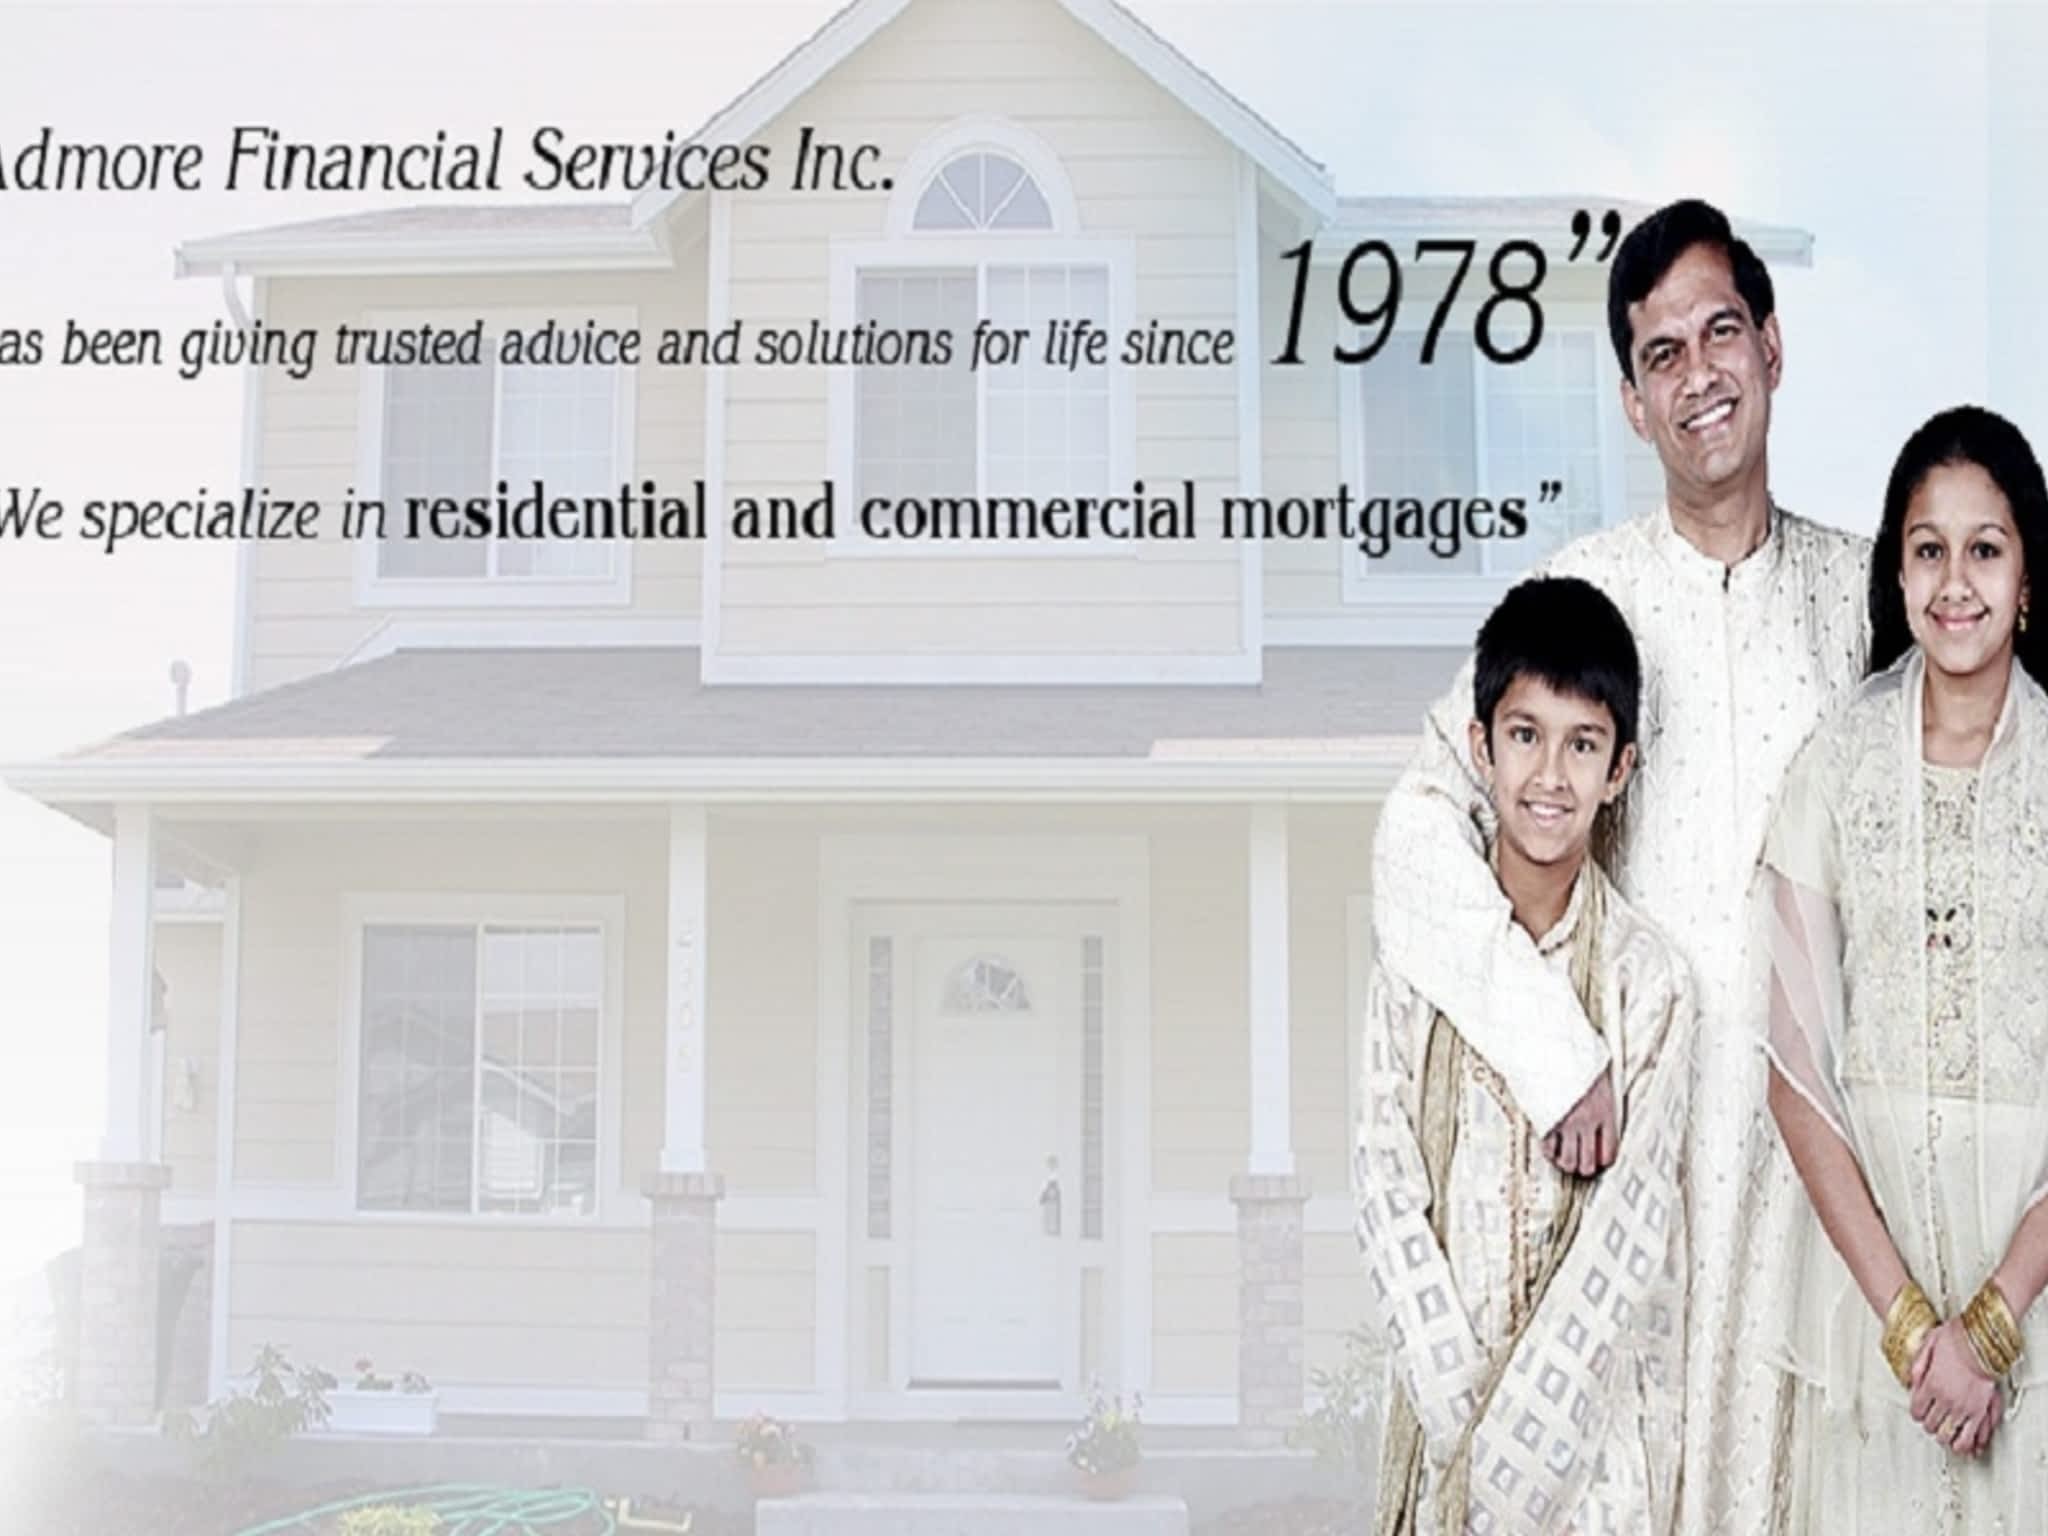 photo Admore Financial Services Inc